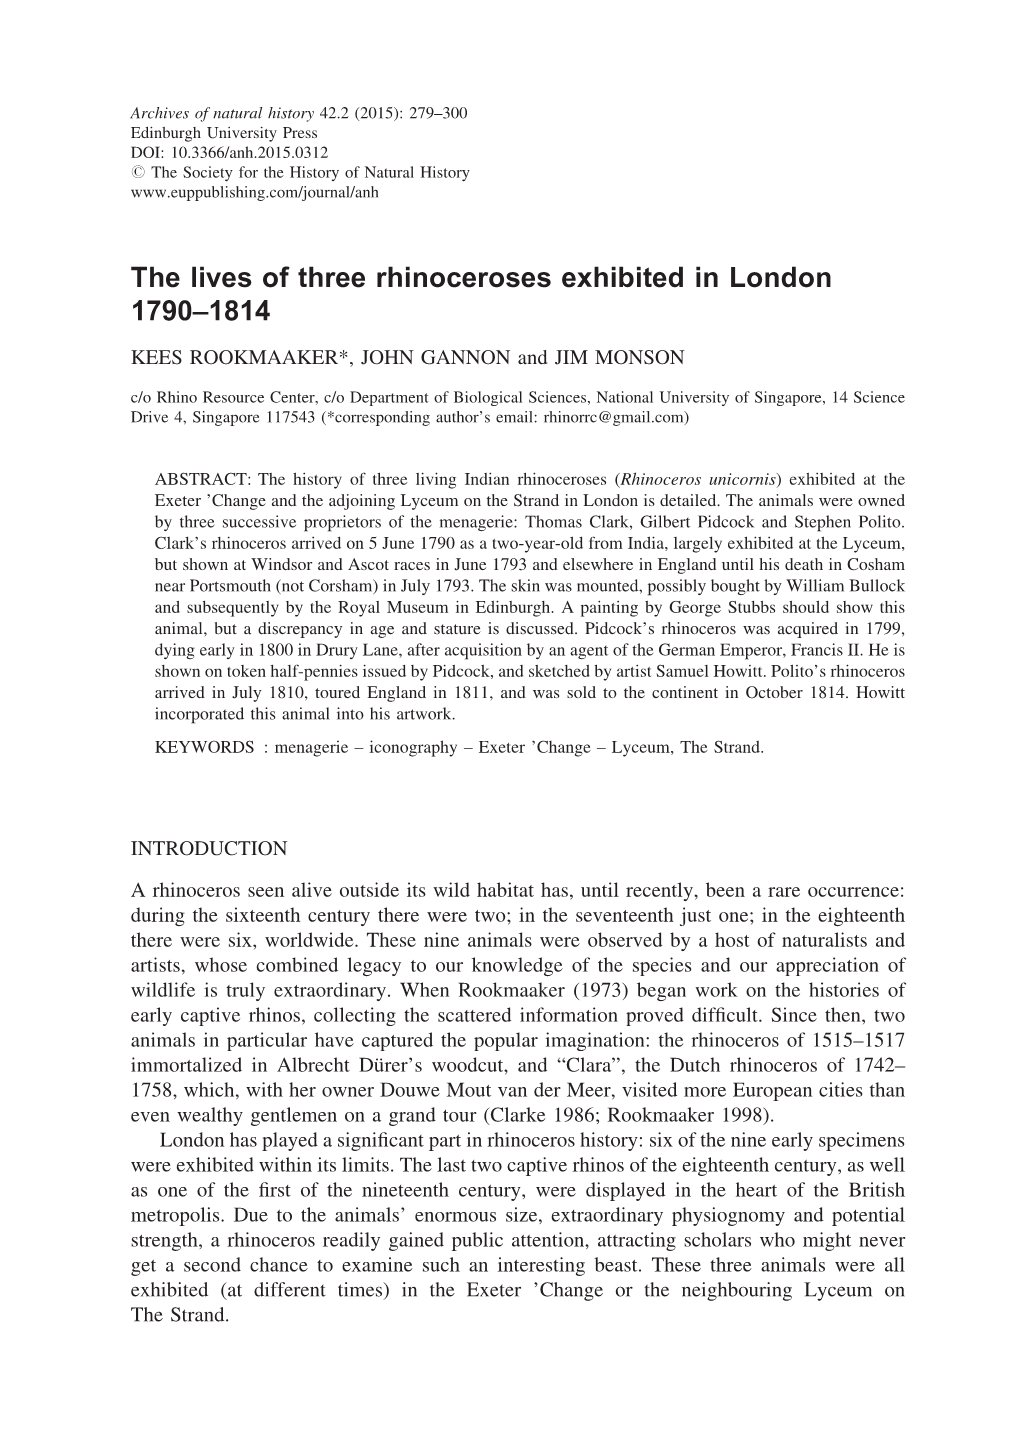 The Lives of Three Rhinoceroses Exhibited in London 1790–1814